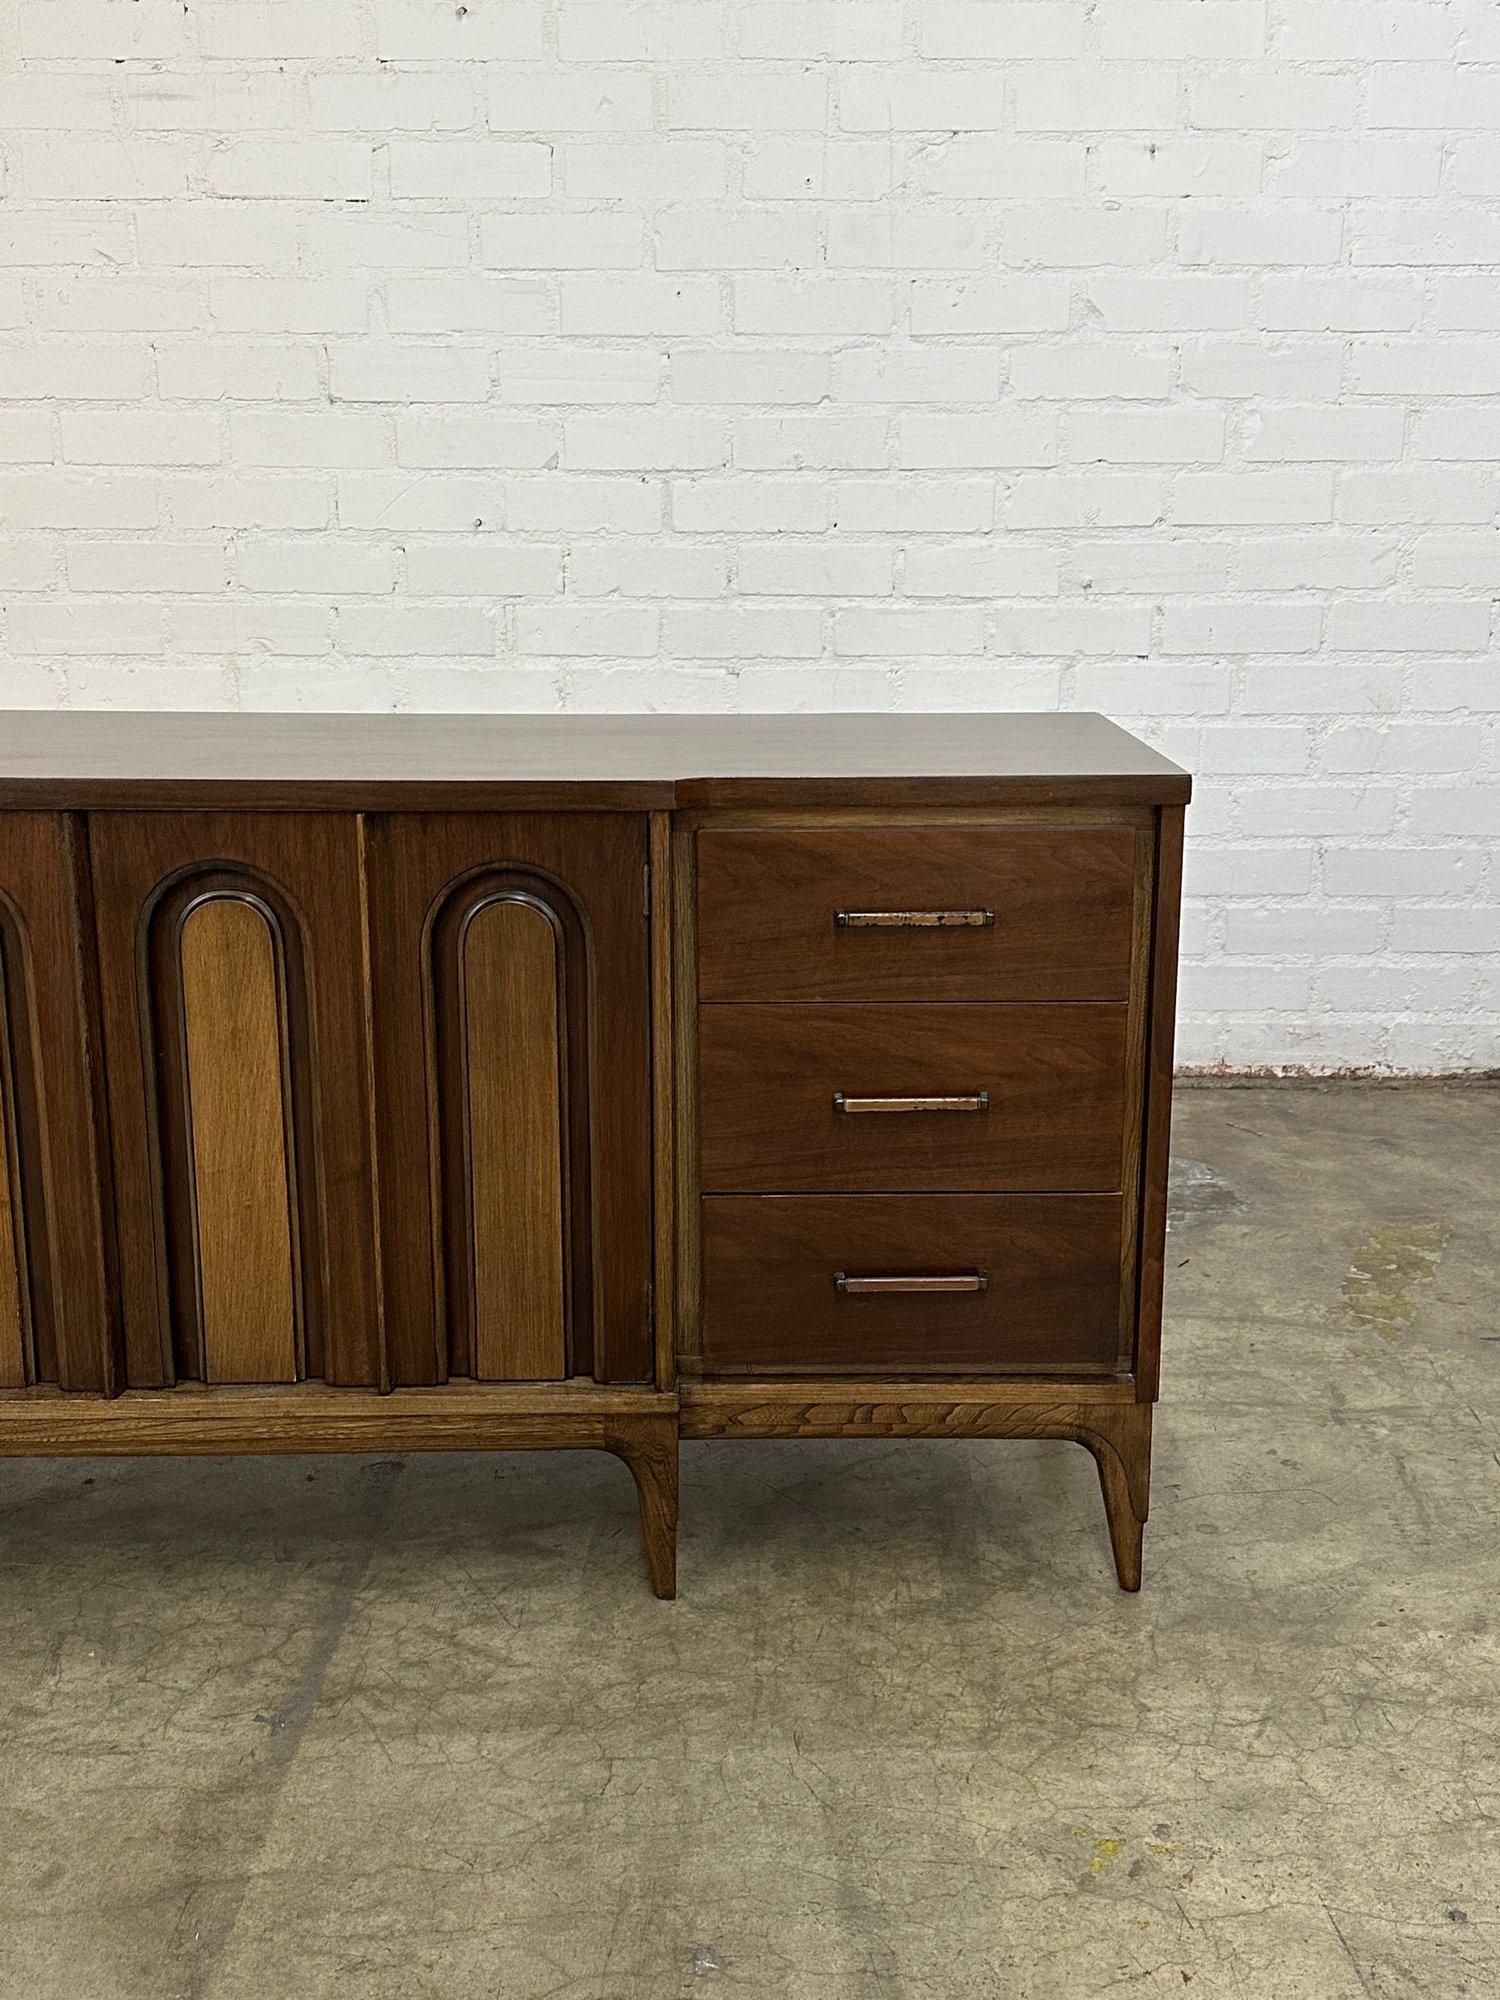 W76.5 D20.5 H31

Vintage Large Credenza in fully restored condition. Item features ample storage with double doors revealing more drawers. Credenza also features sculpted legs, arched details that serve as handles, and original hardware with patina.